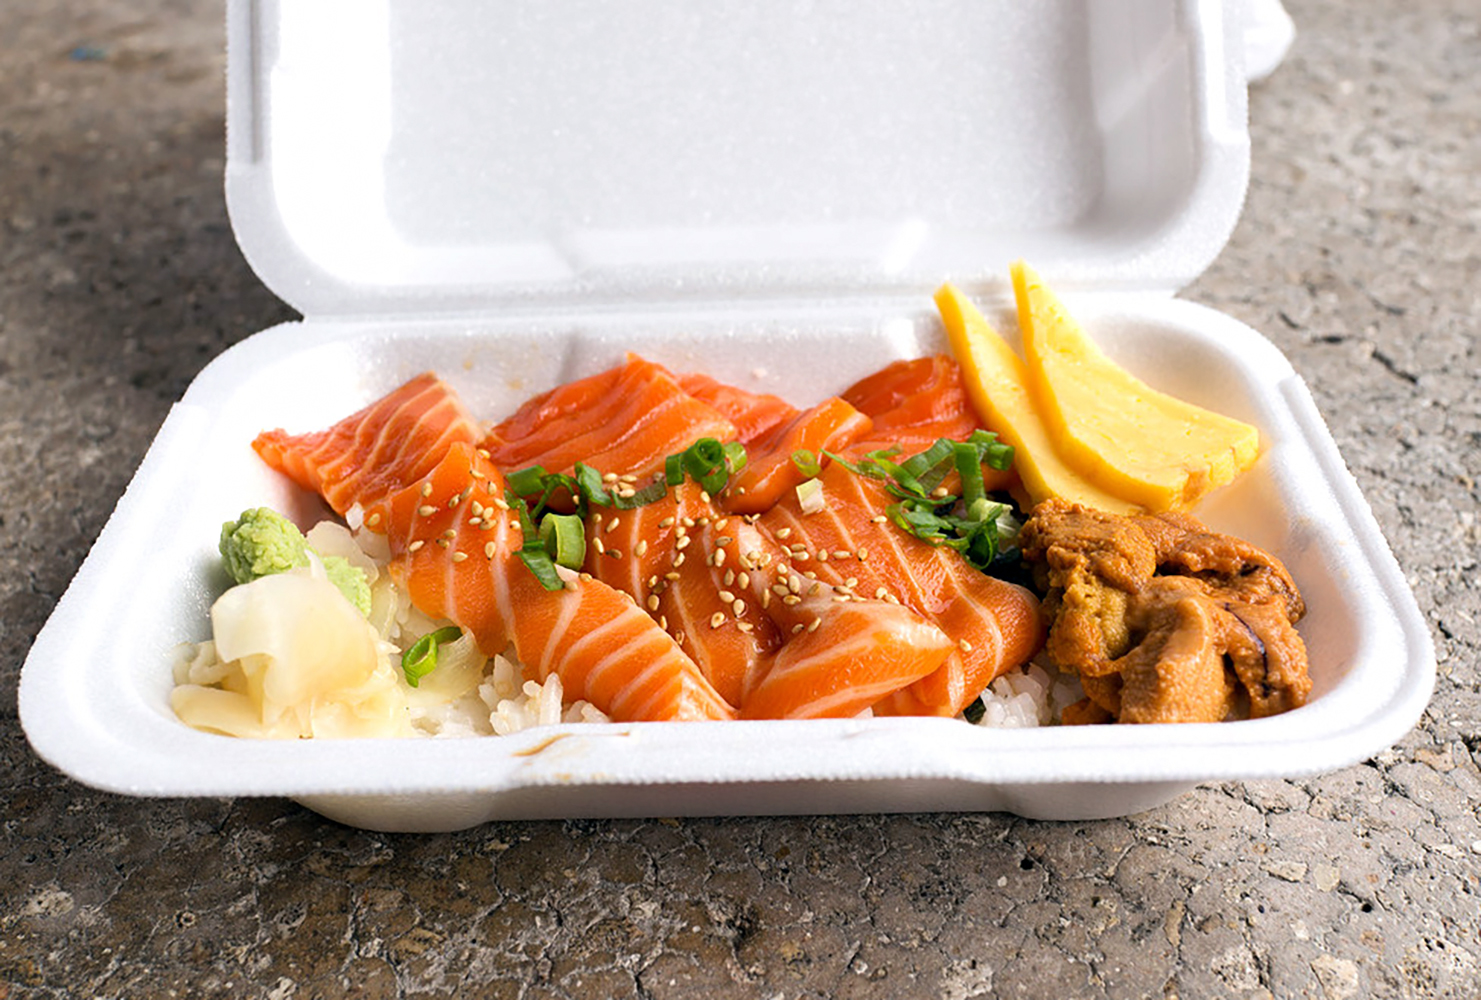 A takeout container full of slices of sashimi.